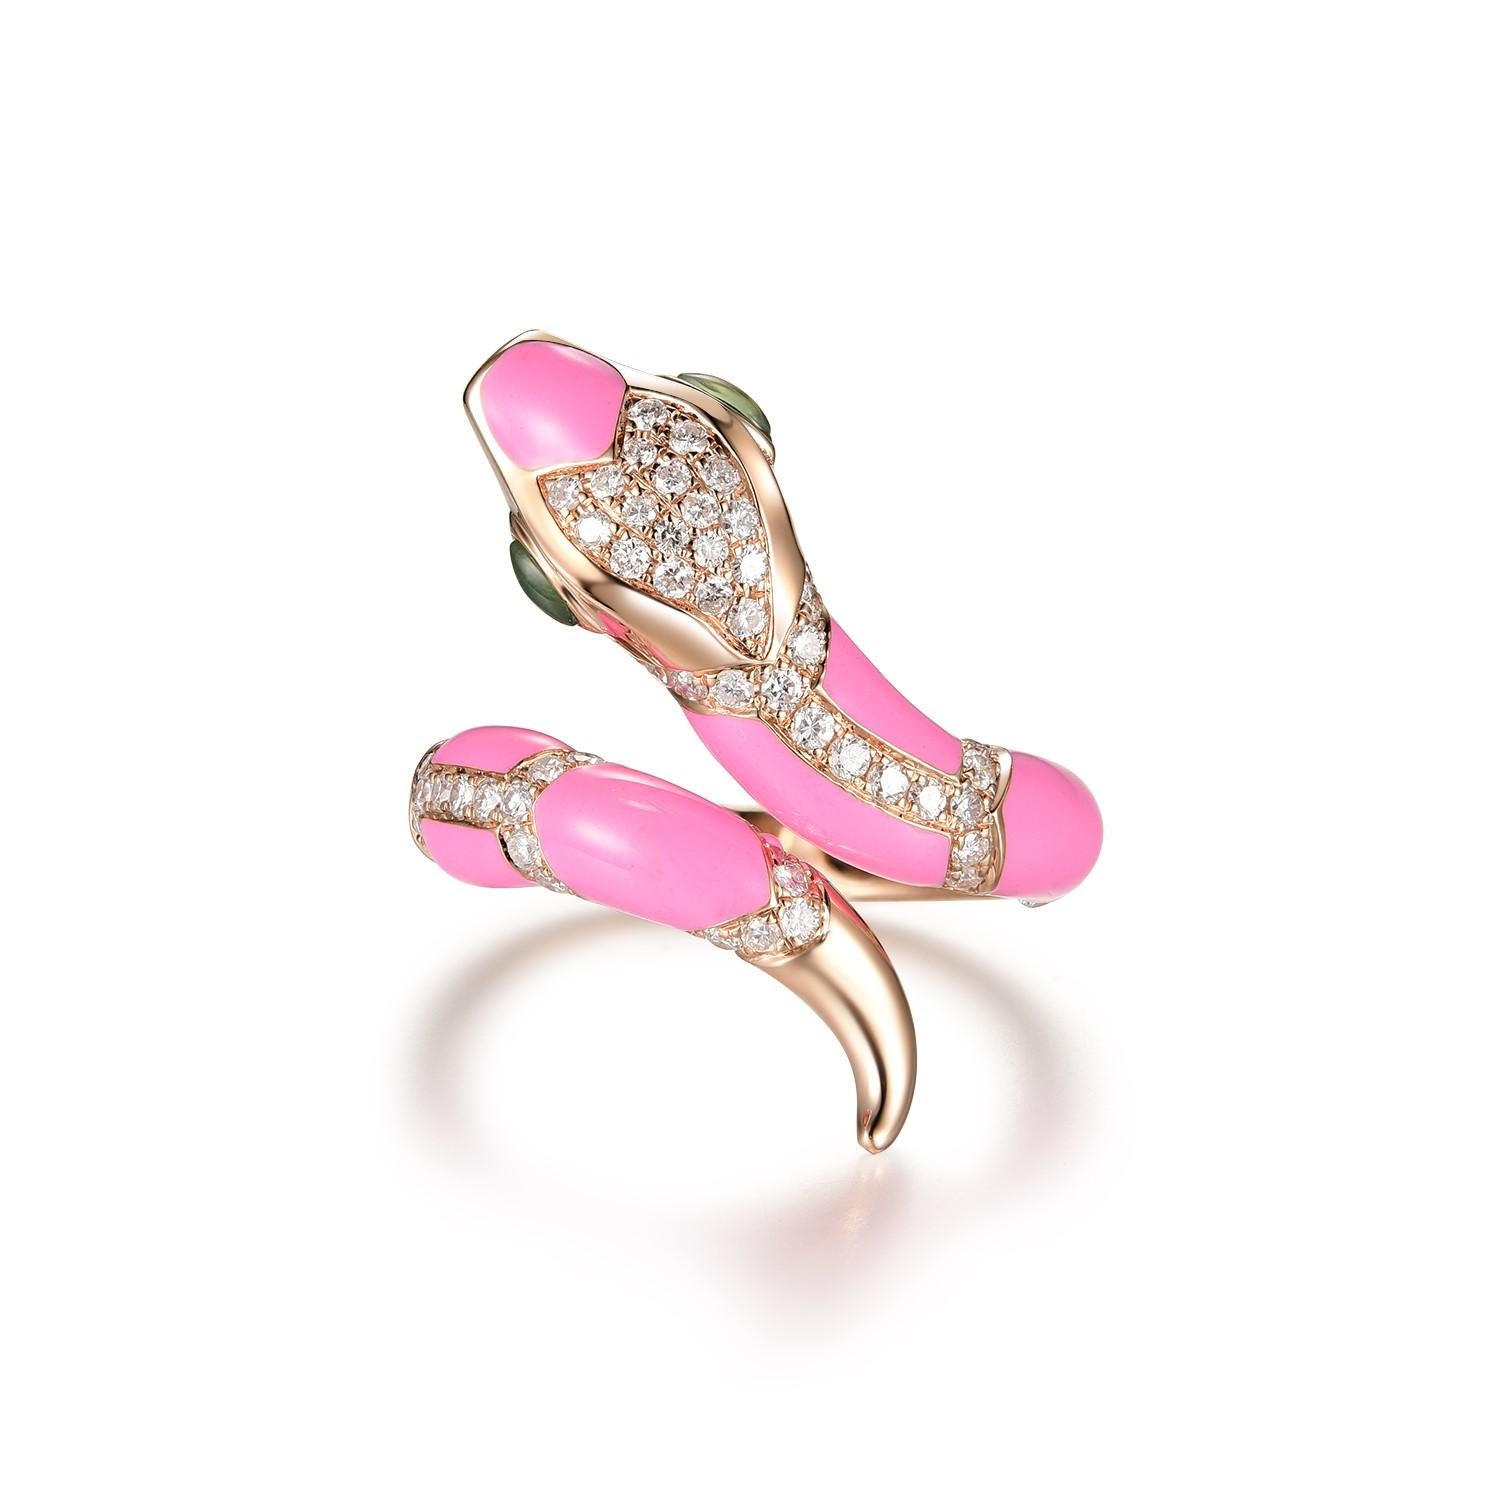 This stunning snake ring features 0.57 carat of white round diamonds, the body is covered with pink enamel. The eyes of the ring is set with green jade. The snake can be customized in any color or stones. Feel free to contact me for inquiry. More